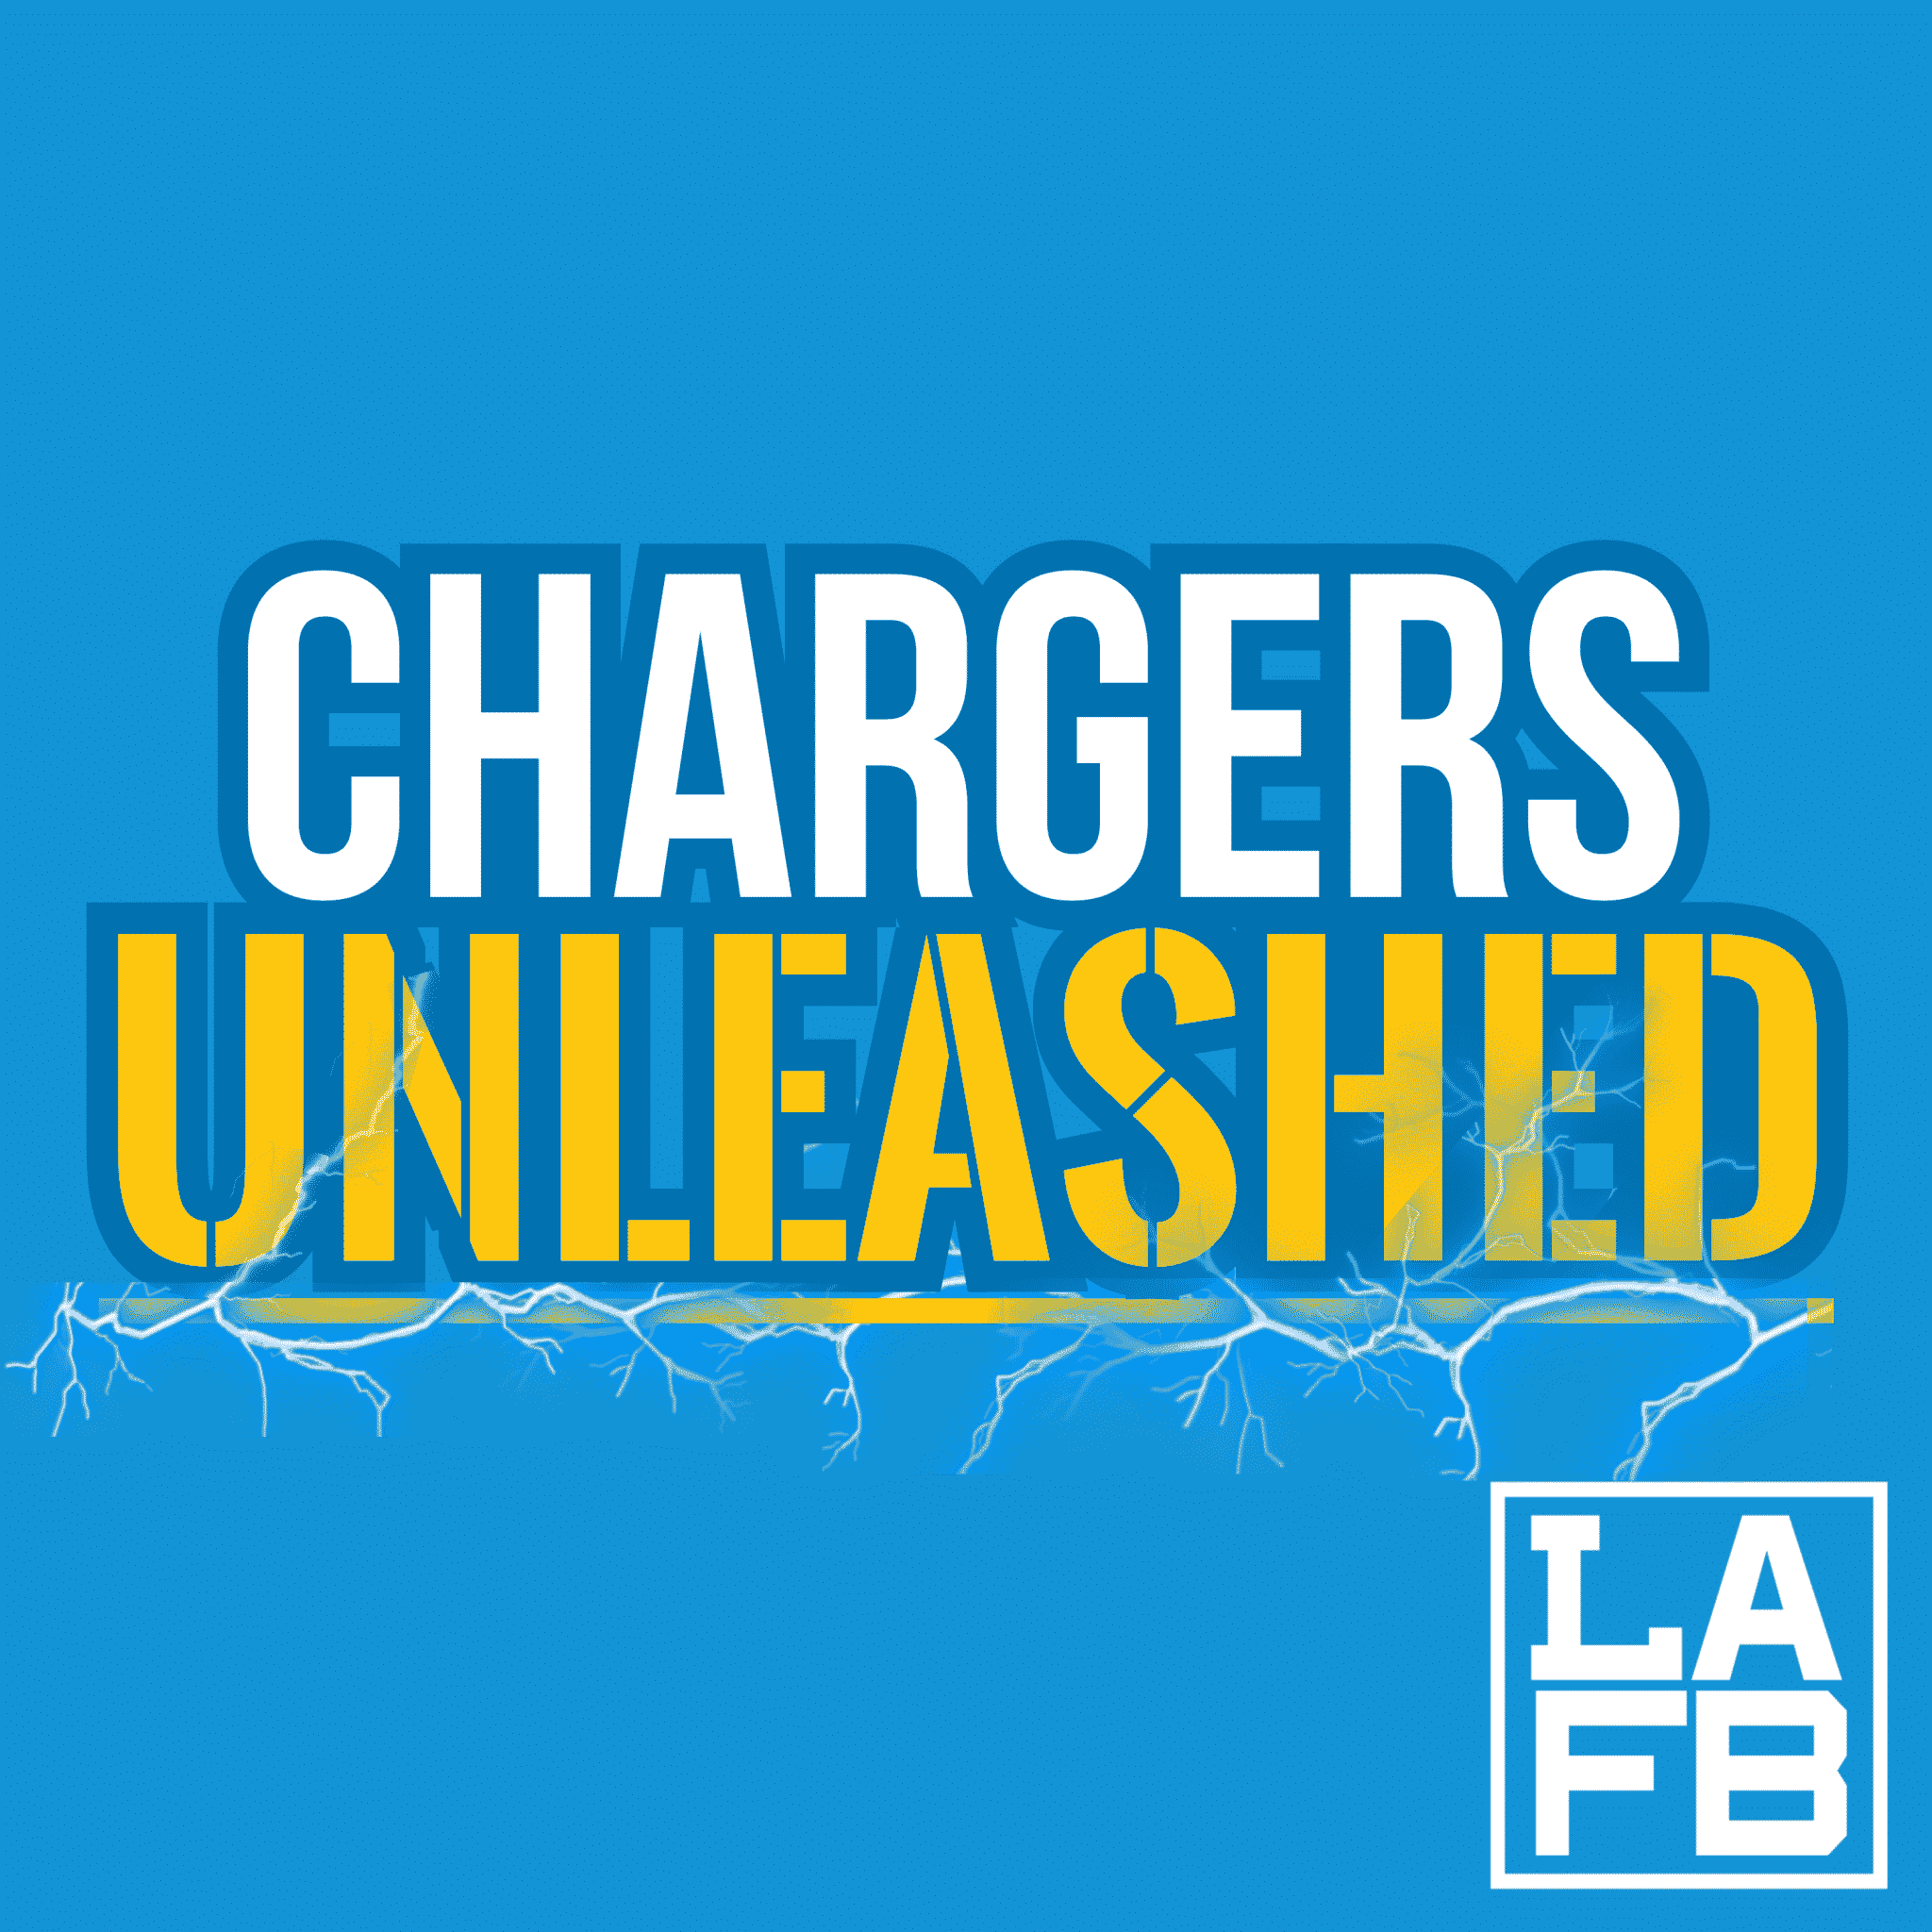 Chargers Training Camp Position Battles: Running Back | Who Could Miss The Cut? | Chargers Unleashed